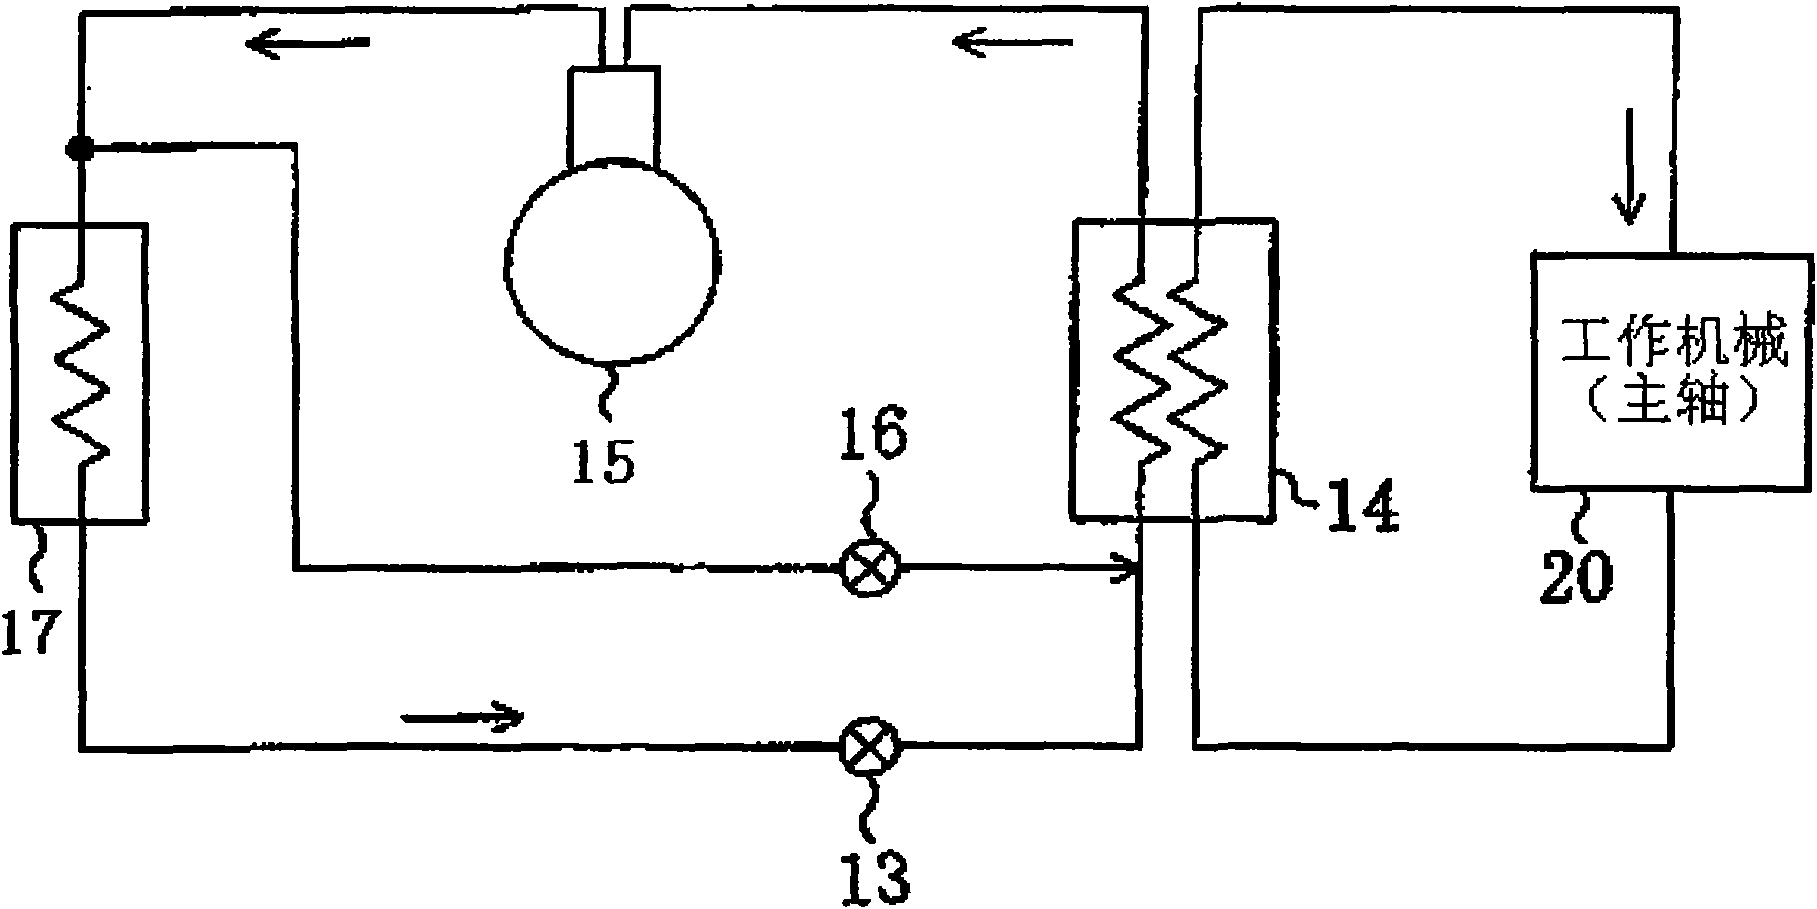 Frequency conversion energy-saving temperature control device of refrigerating device